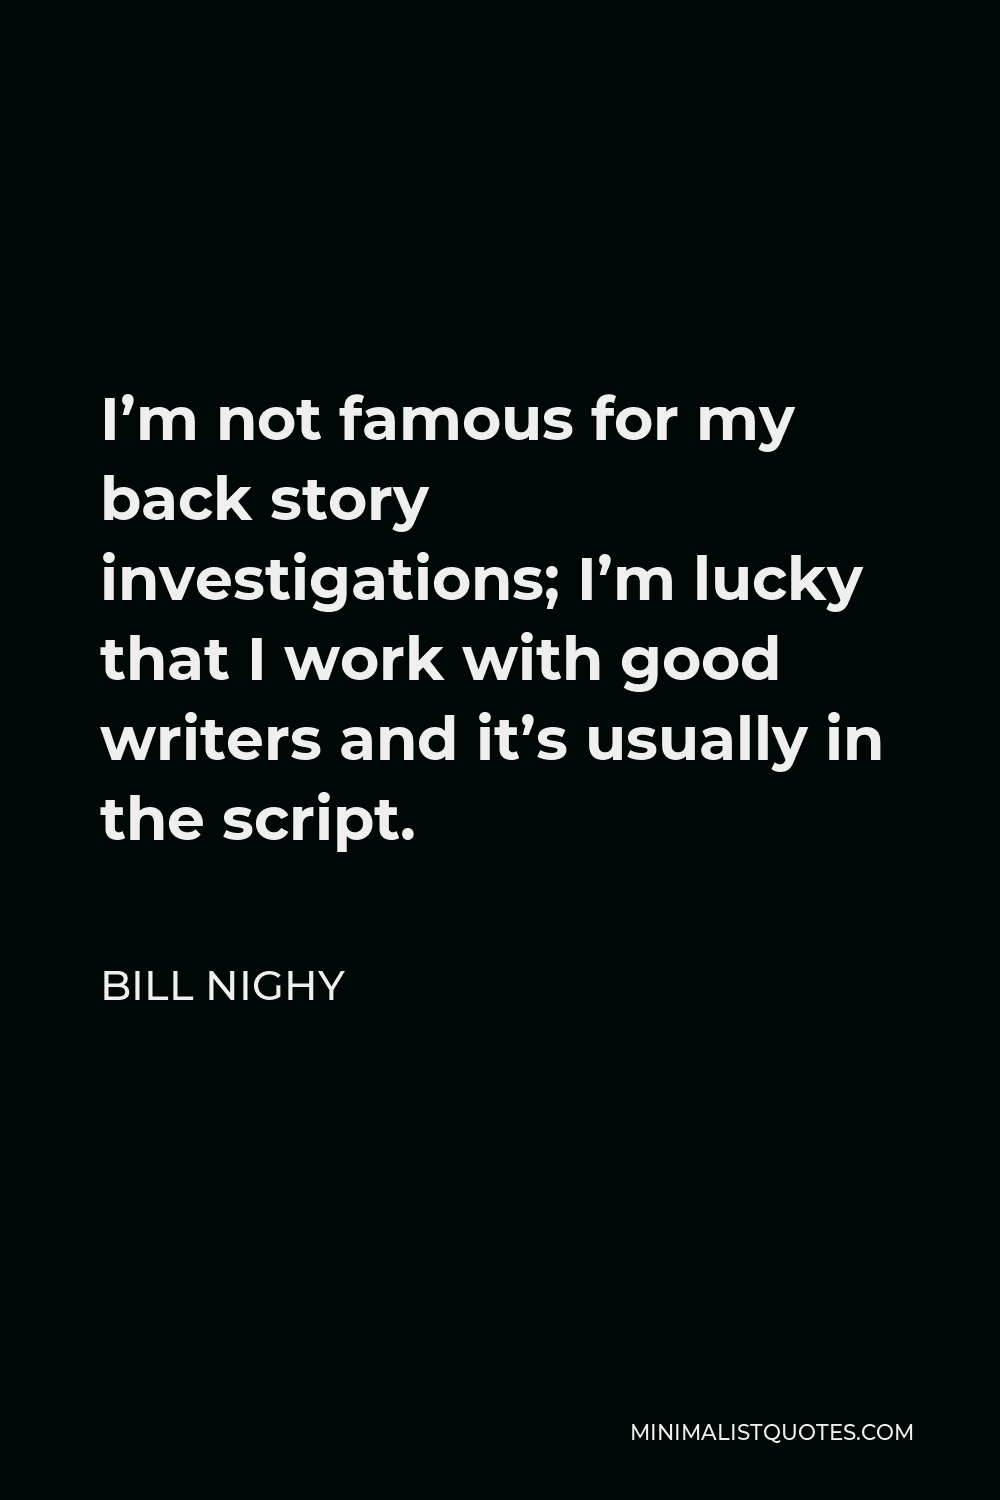 Bill Nighy Quote - I’m not famous for my back story investigations; I’m lucky that I work with good writers and it’s usually in the script.